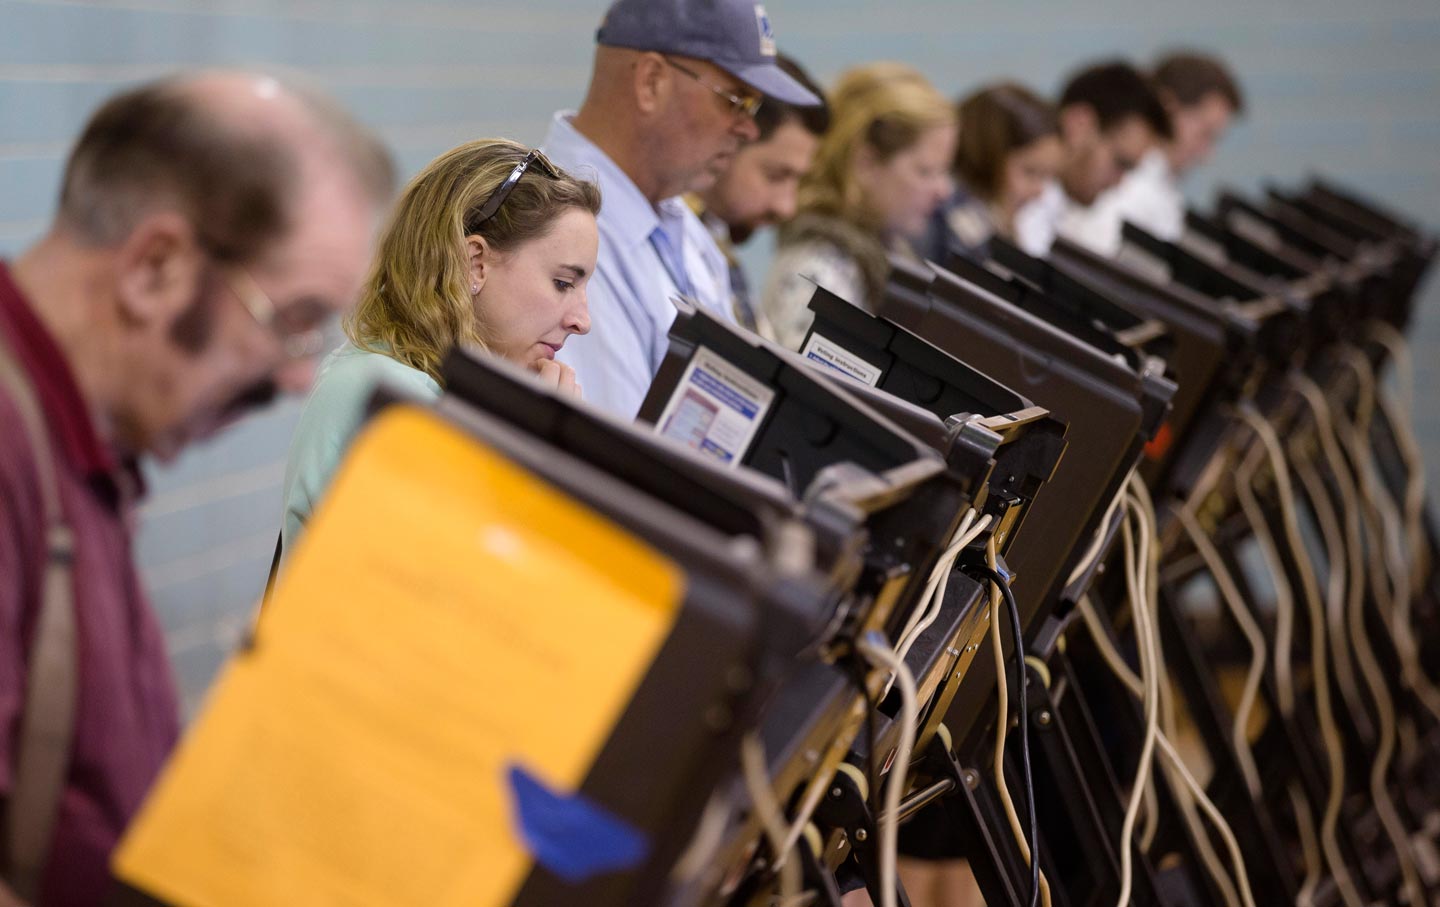 Voters use electronic voting machines on election day, Tuesday, November 3, 2015, in Columbus, Ohio.